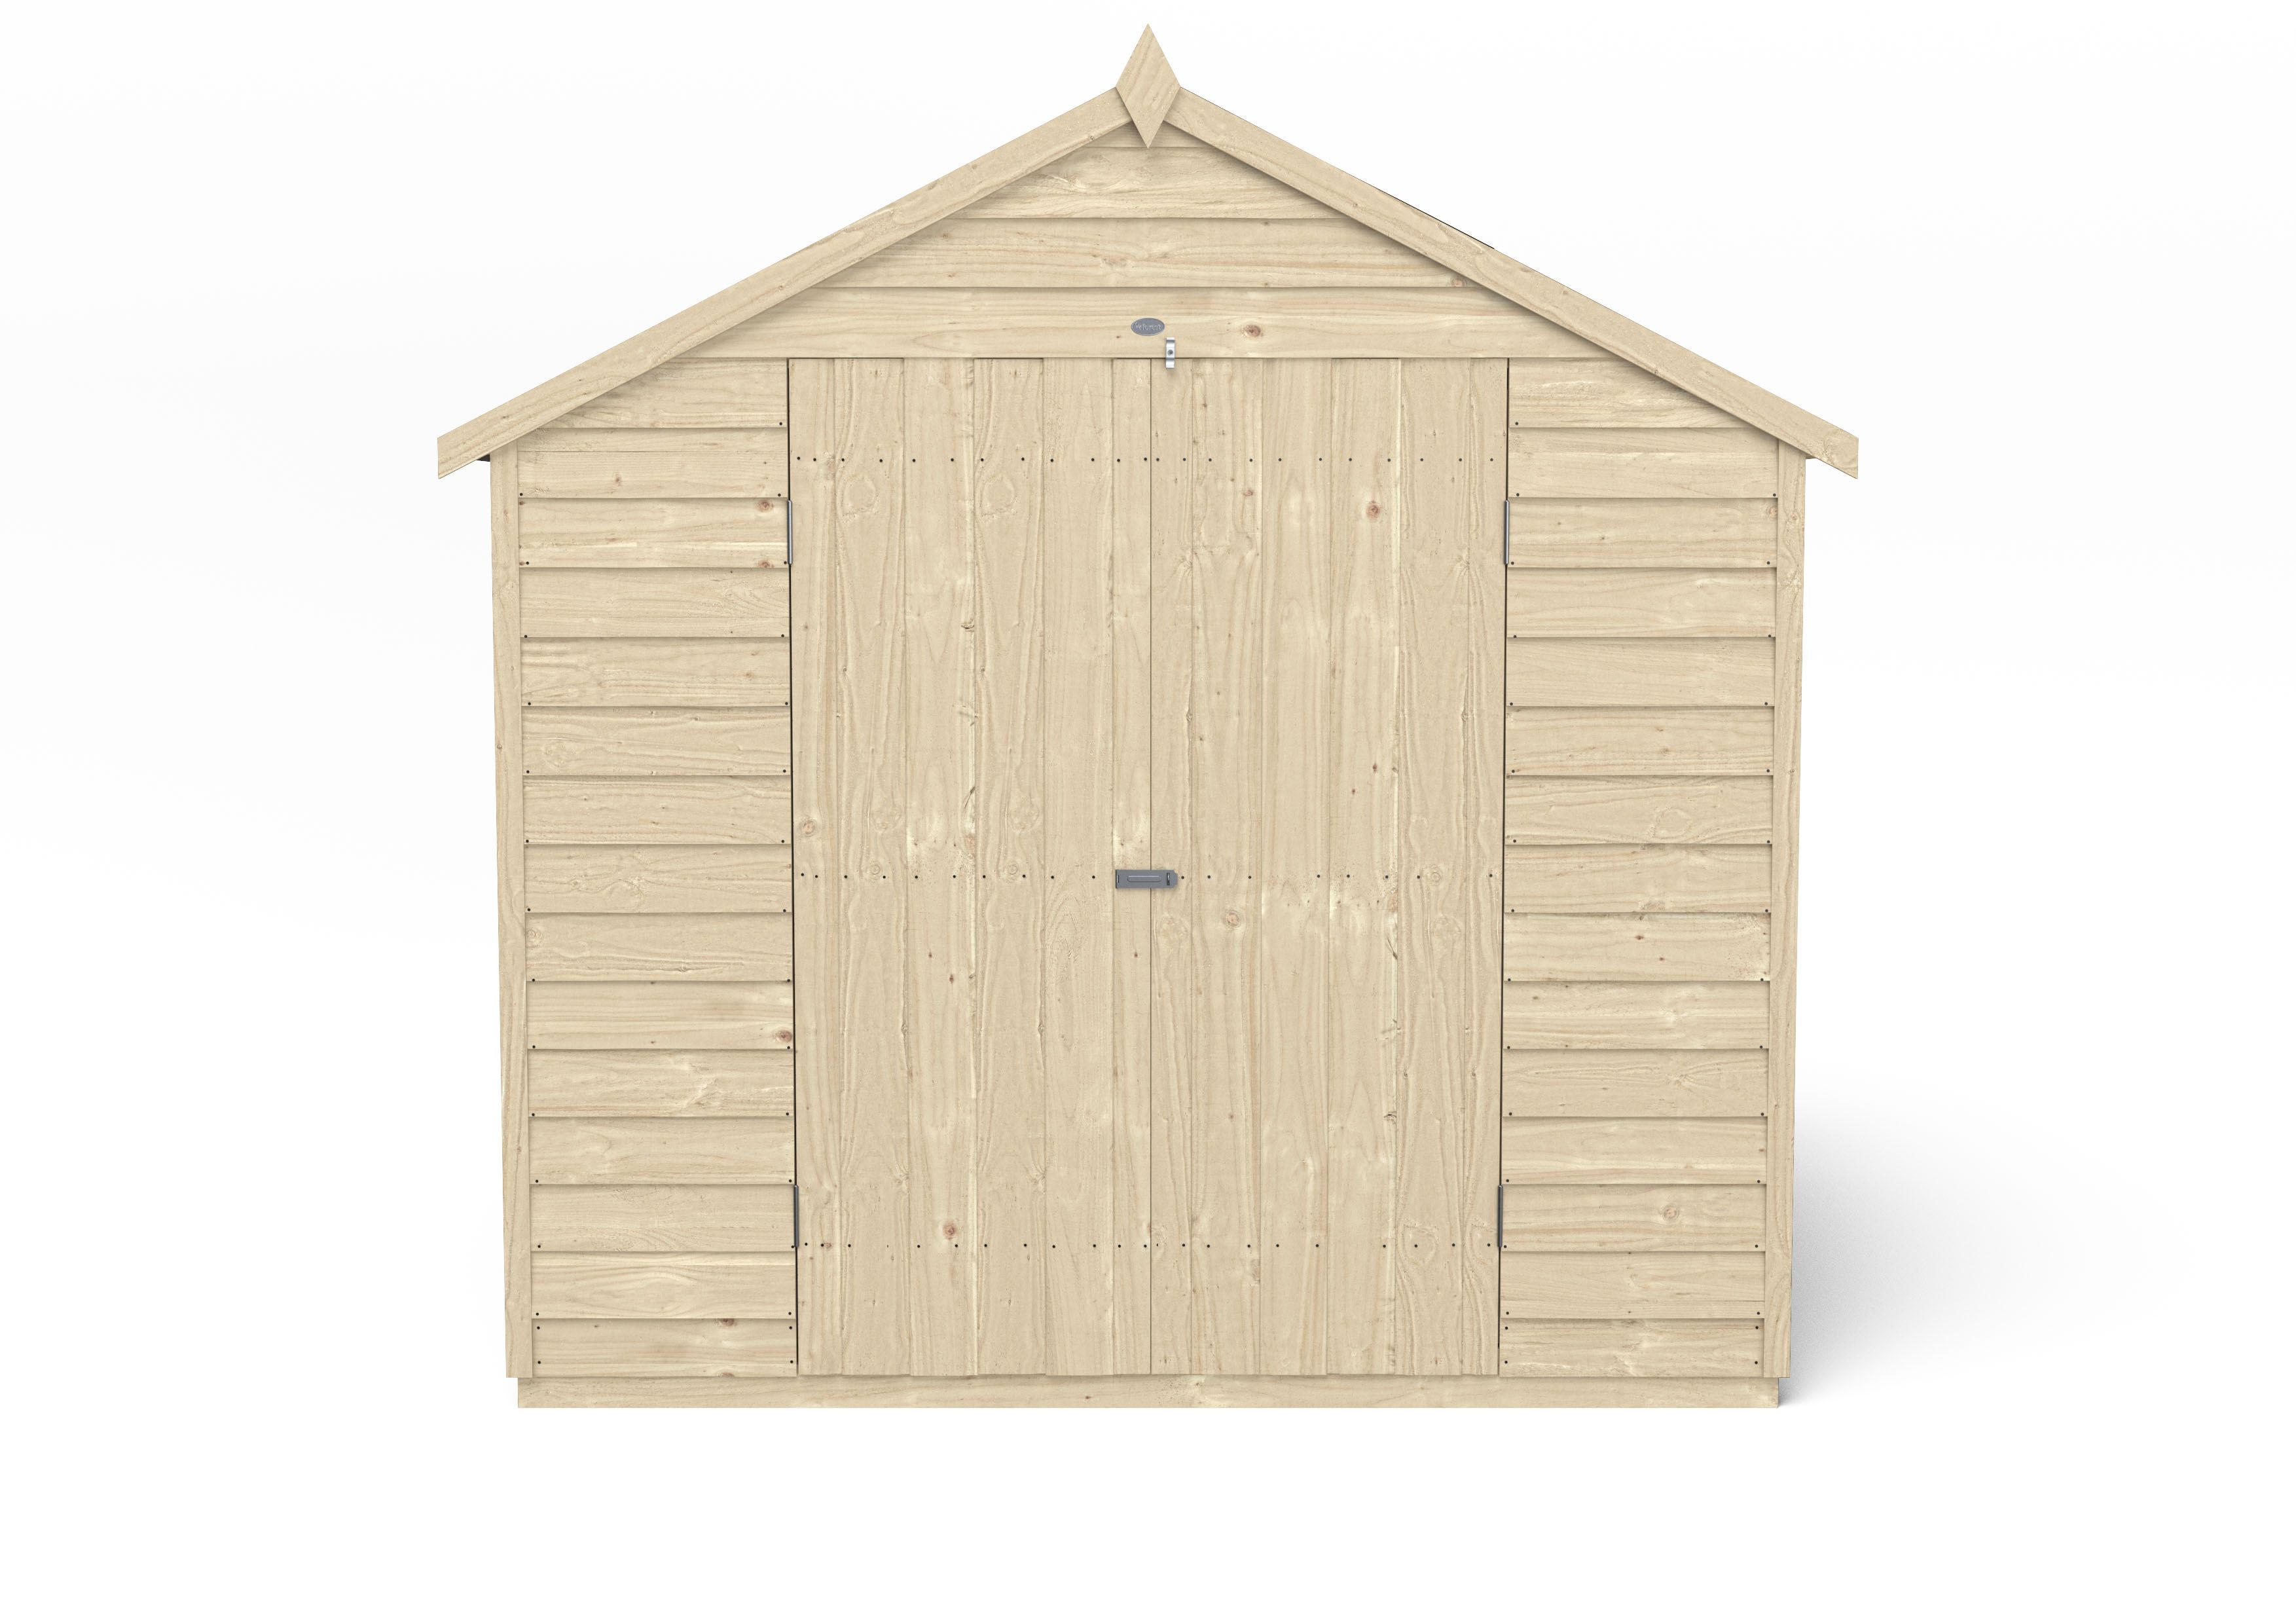 Forest Garden Overlap 7x7 ft Apex Wooden 2 door Shed with floor & 2 windows (Base included) - Assembly service included